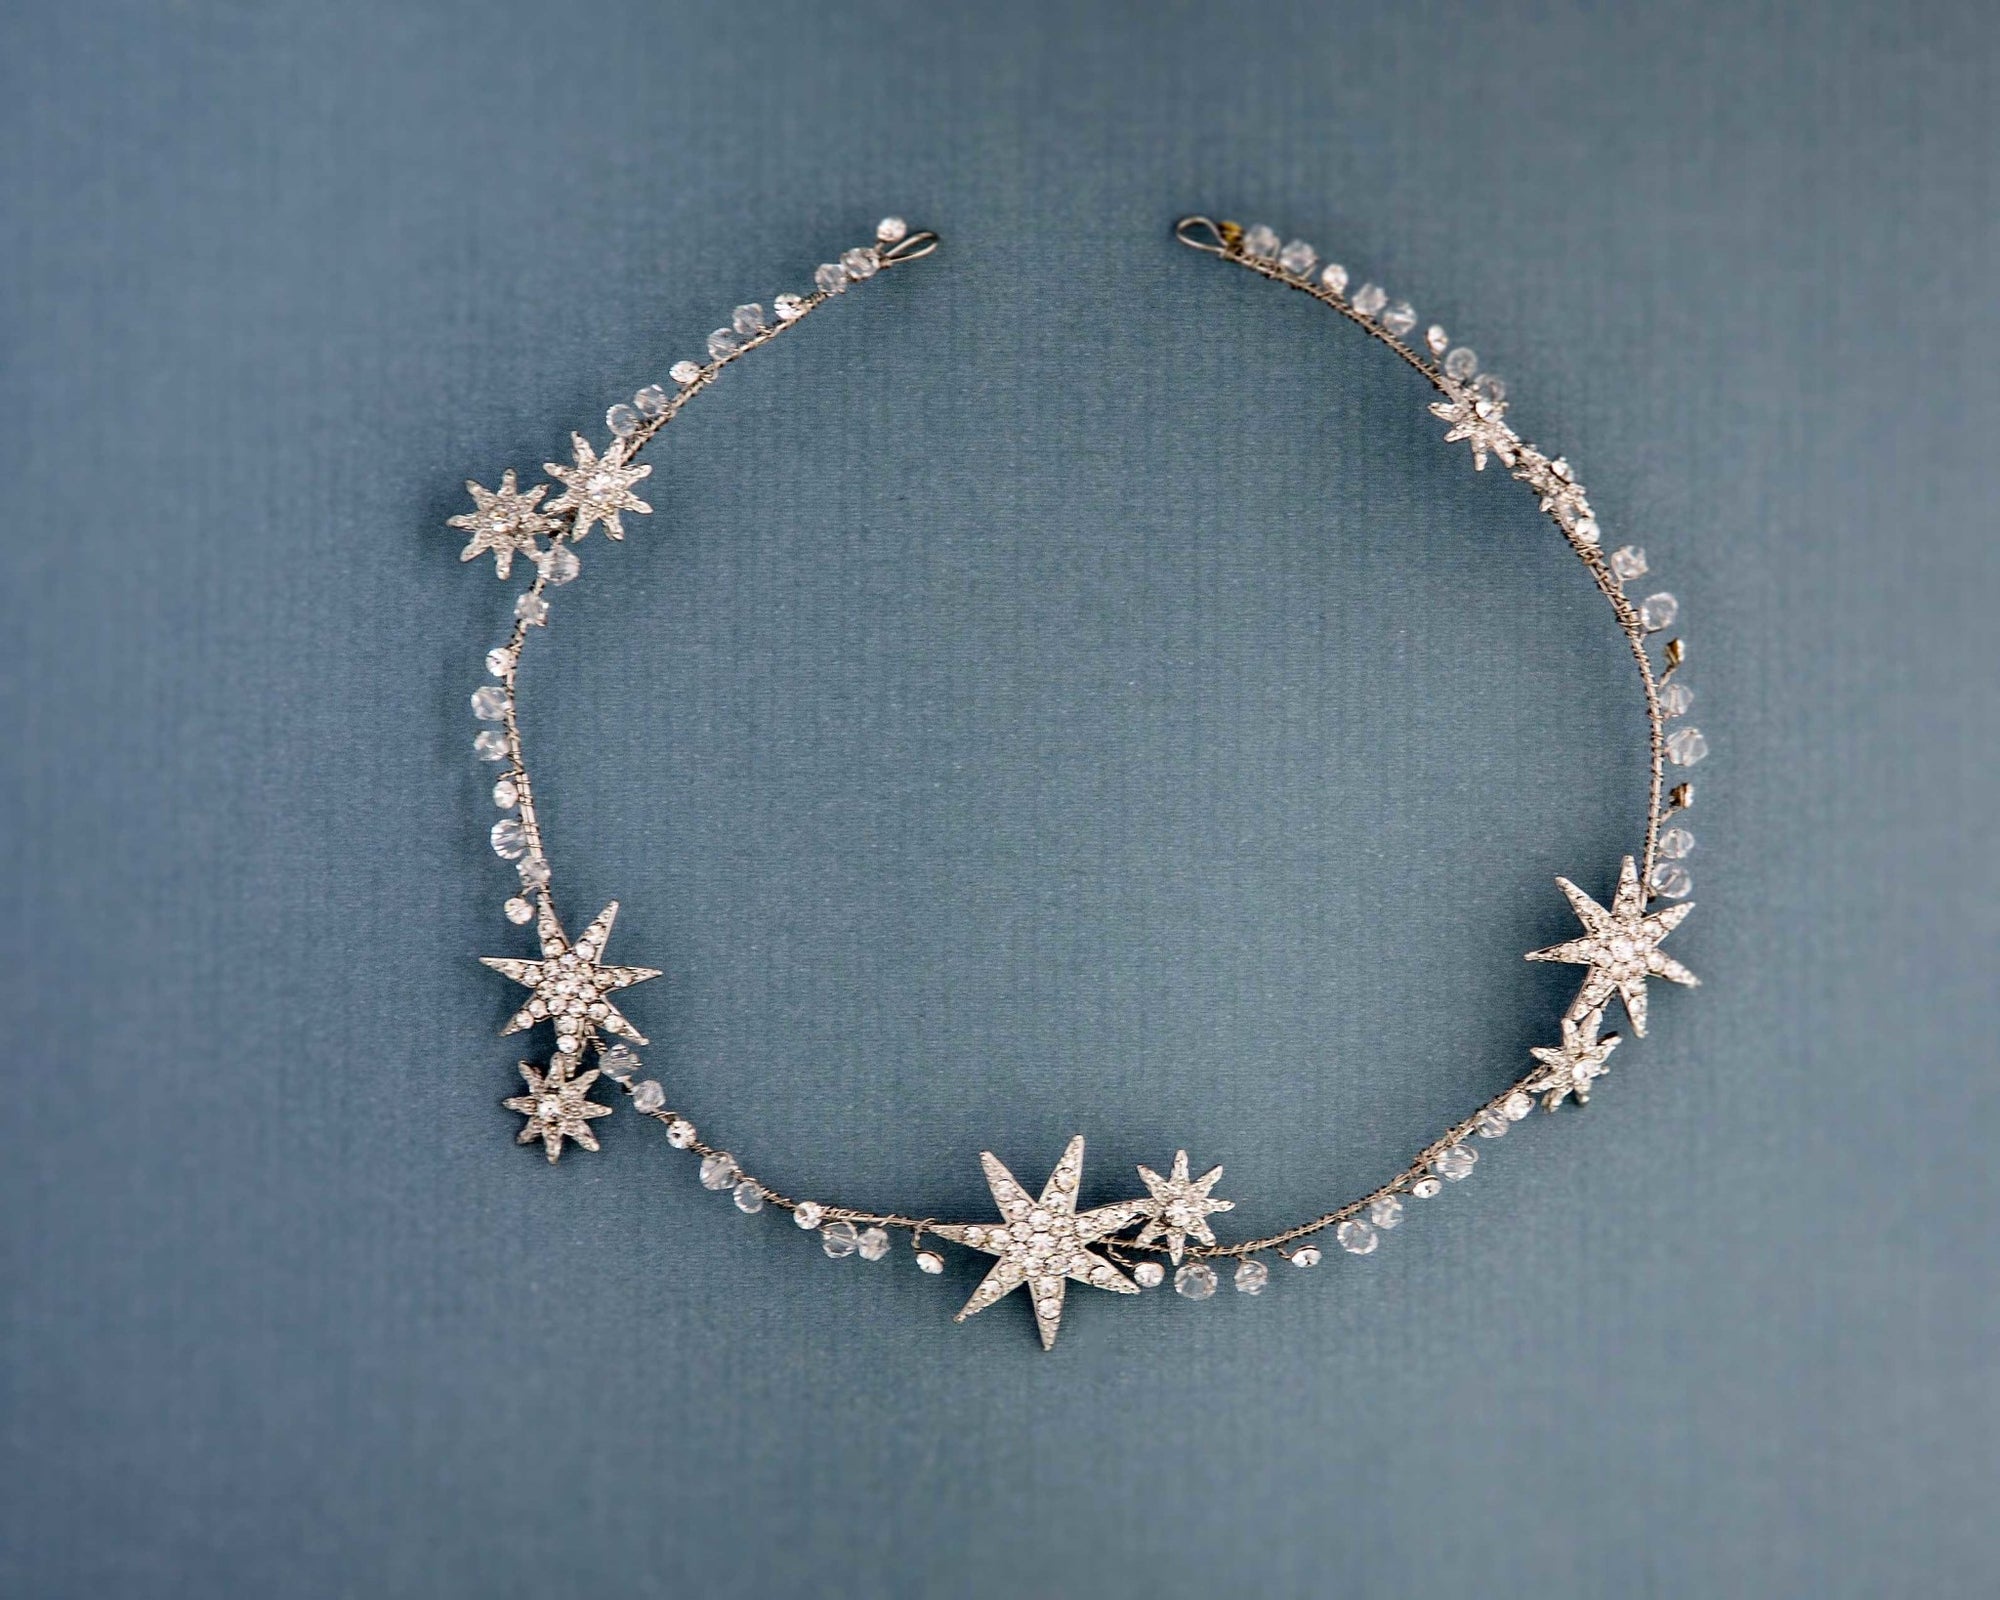 Antique Silver Stars and Crystals Headpiece